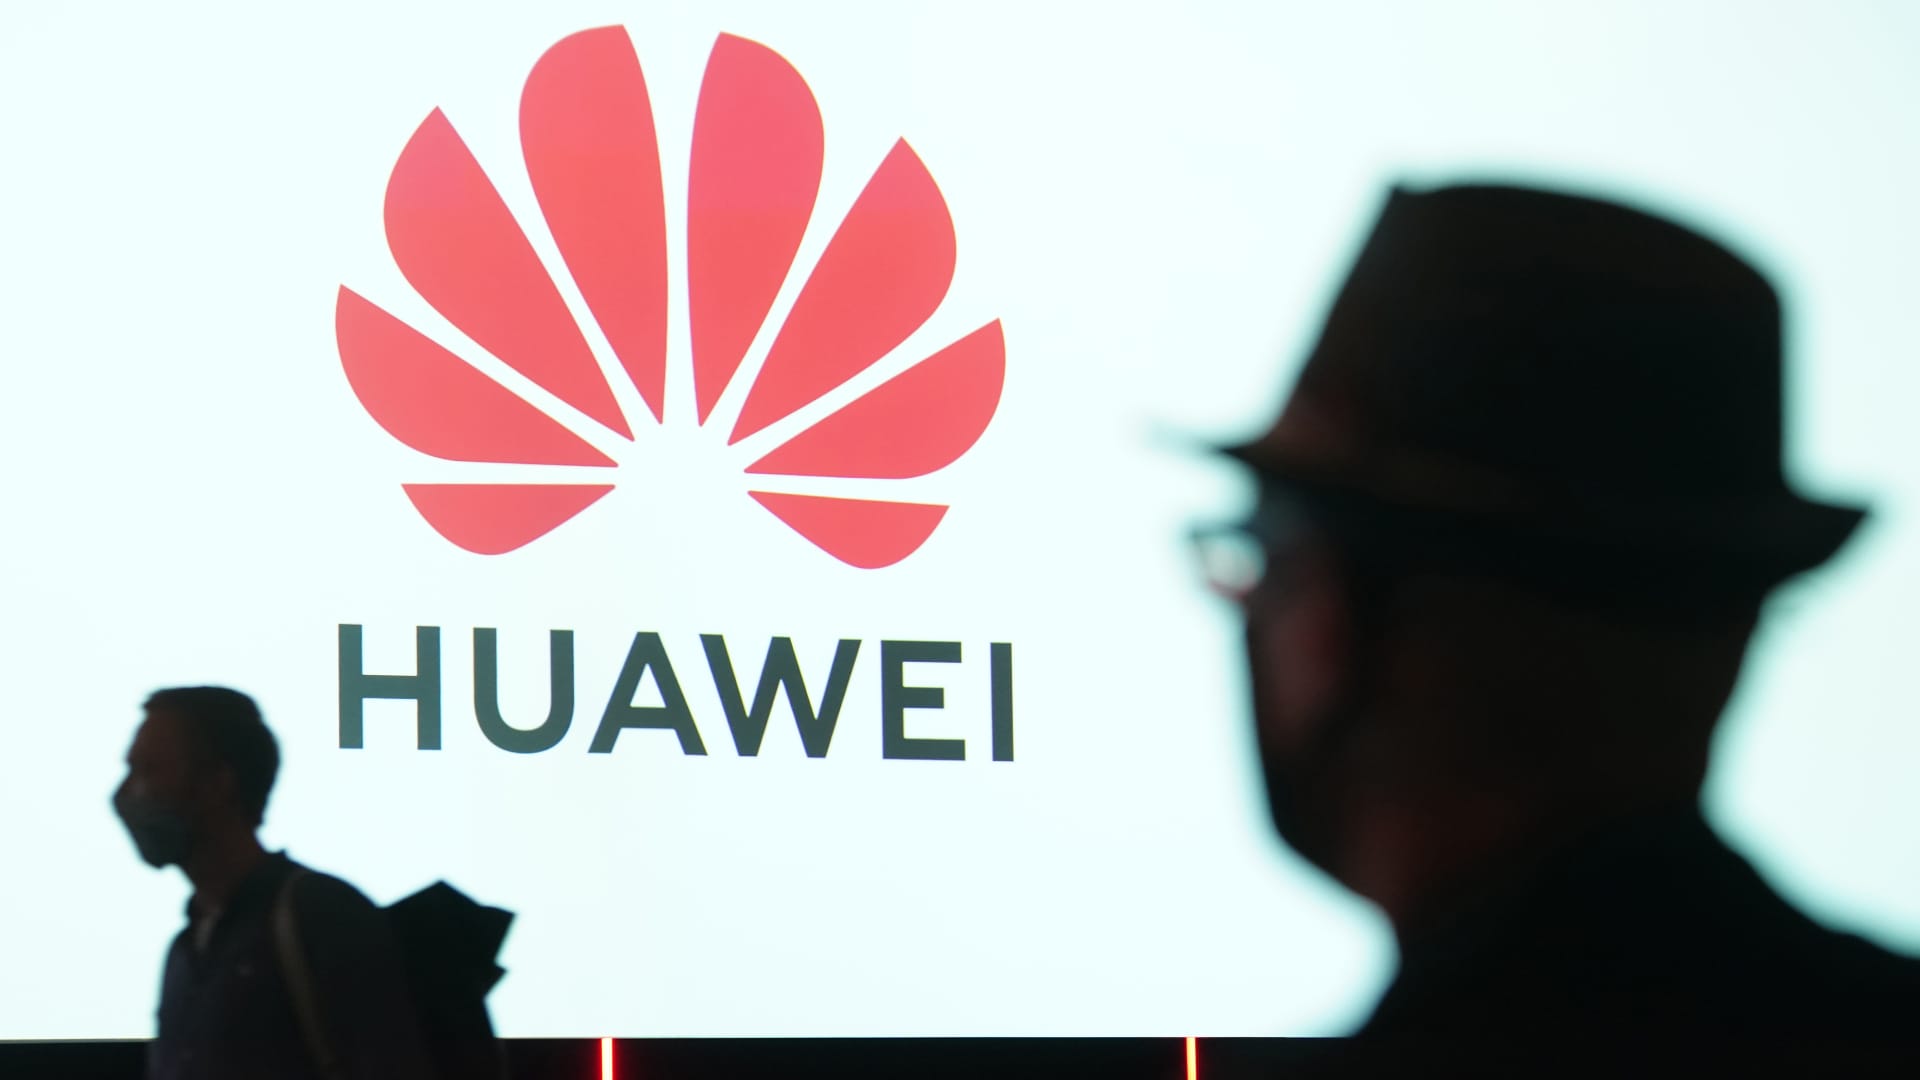 U.S. revokes some export licenses to supply chips to China’s Huawei